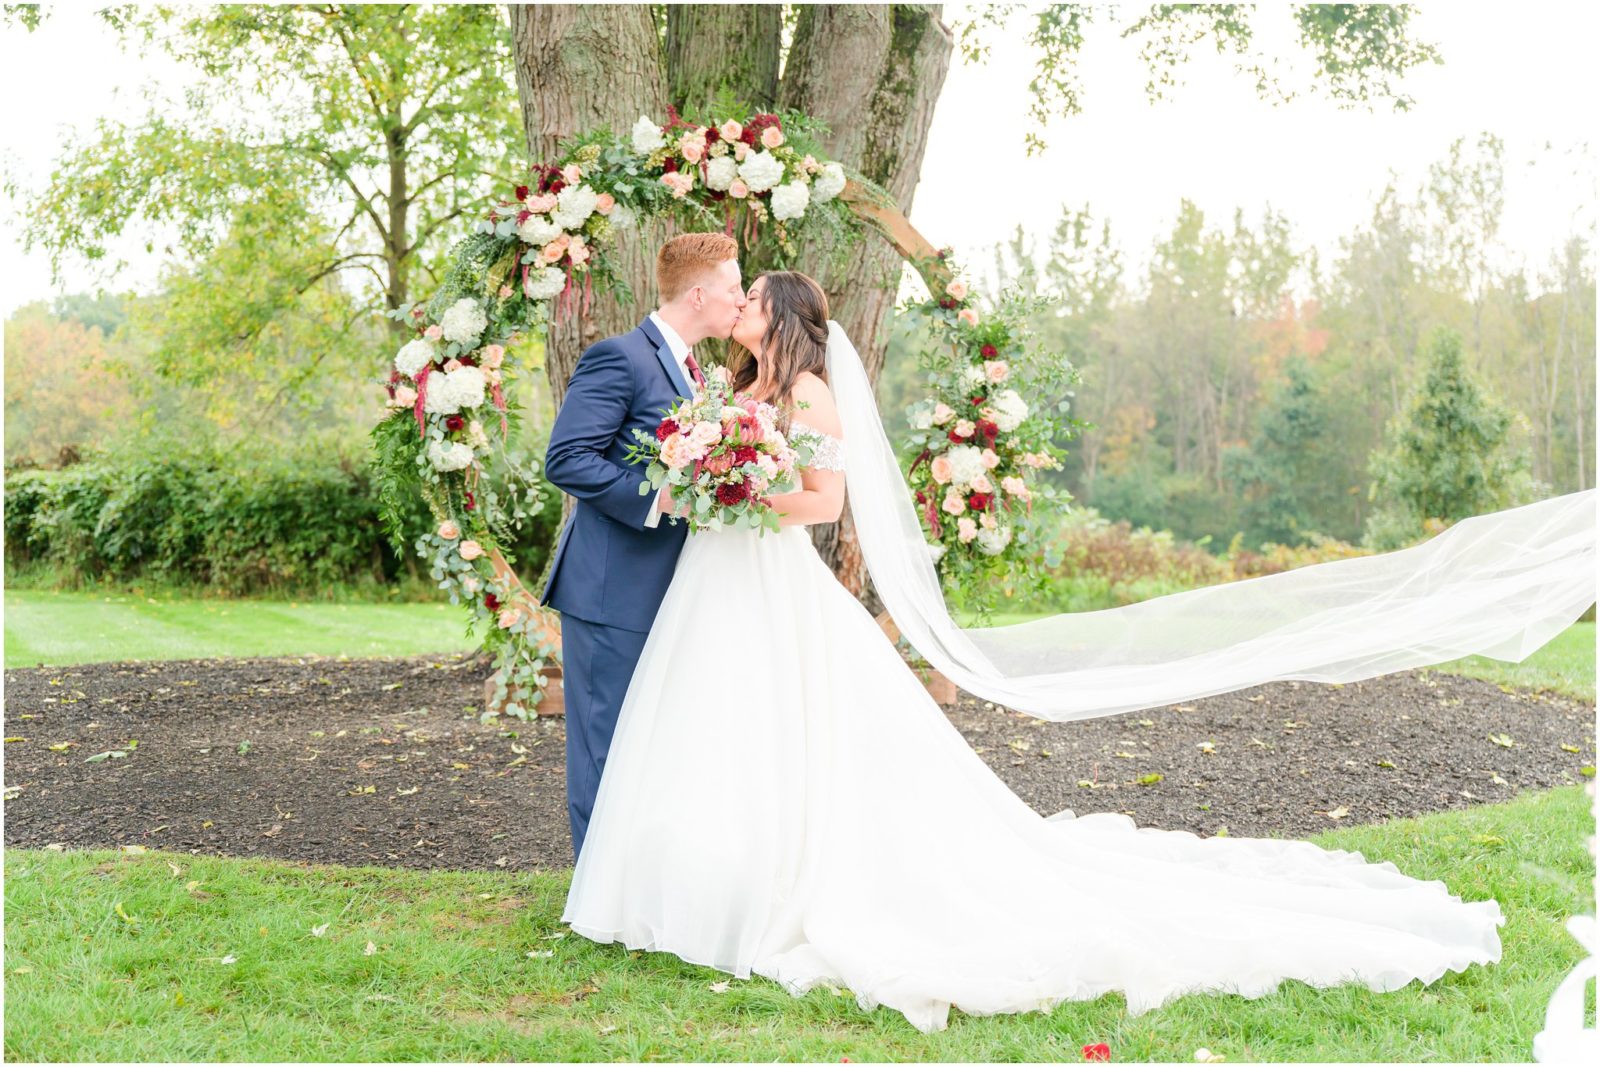 Dip kiss in front of floral arch Mustard Seed Gardens wedding